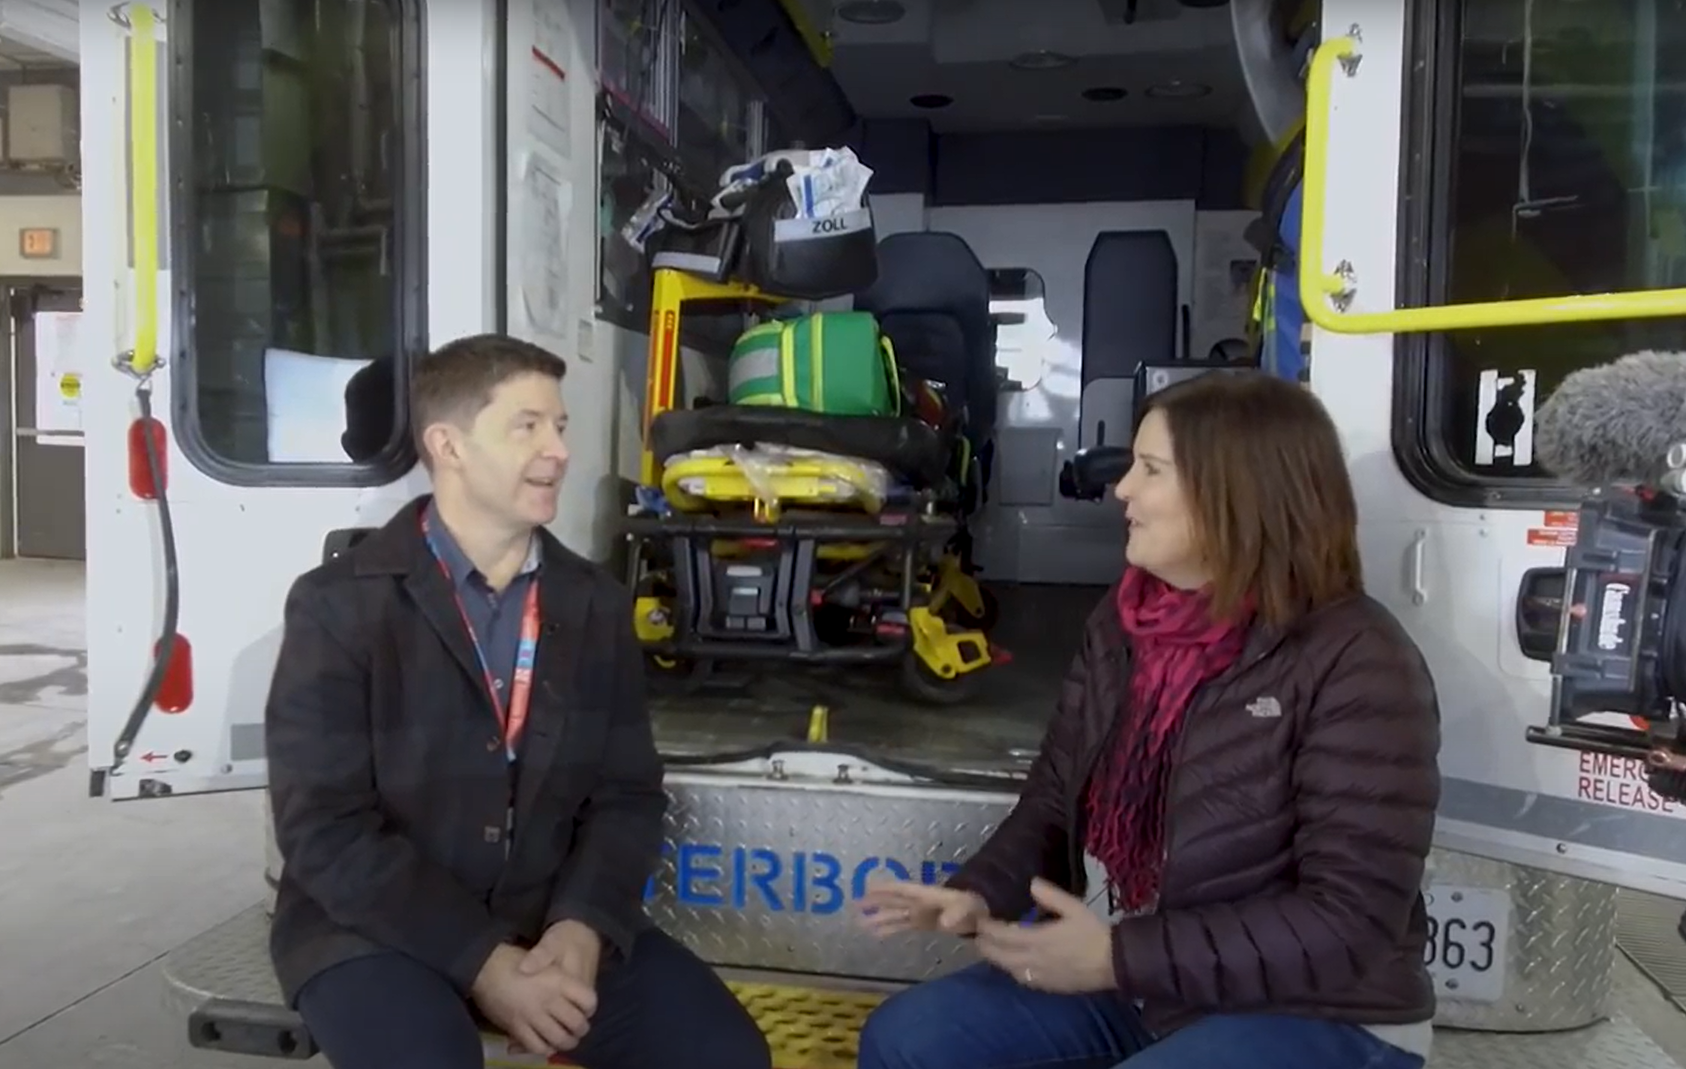 Dr. Troy Tebbenham and PRHC Foundation President & CEO, Lesley Heighway, sit and talk on the back of an ambulance